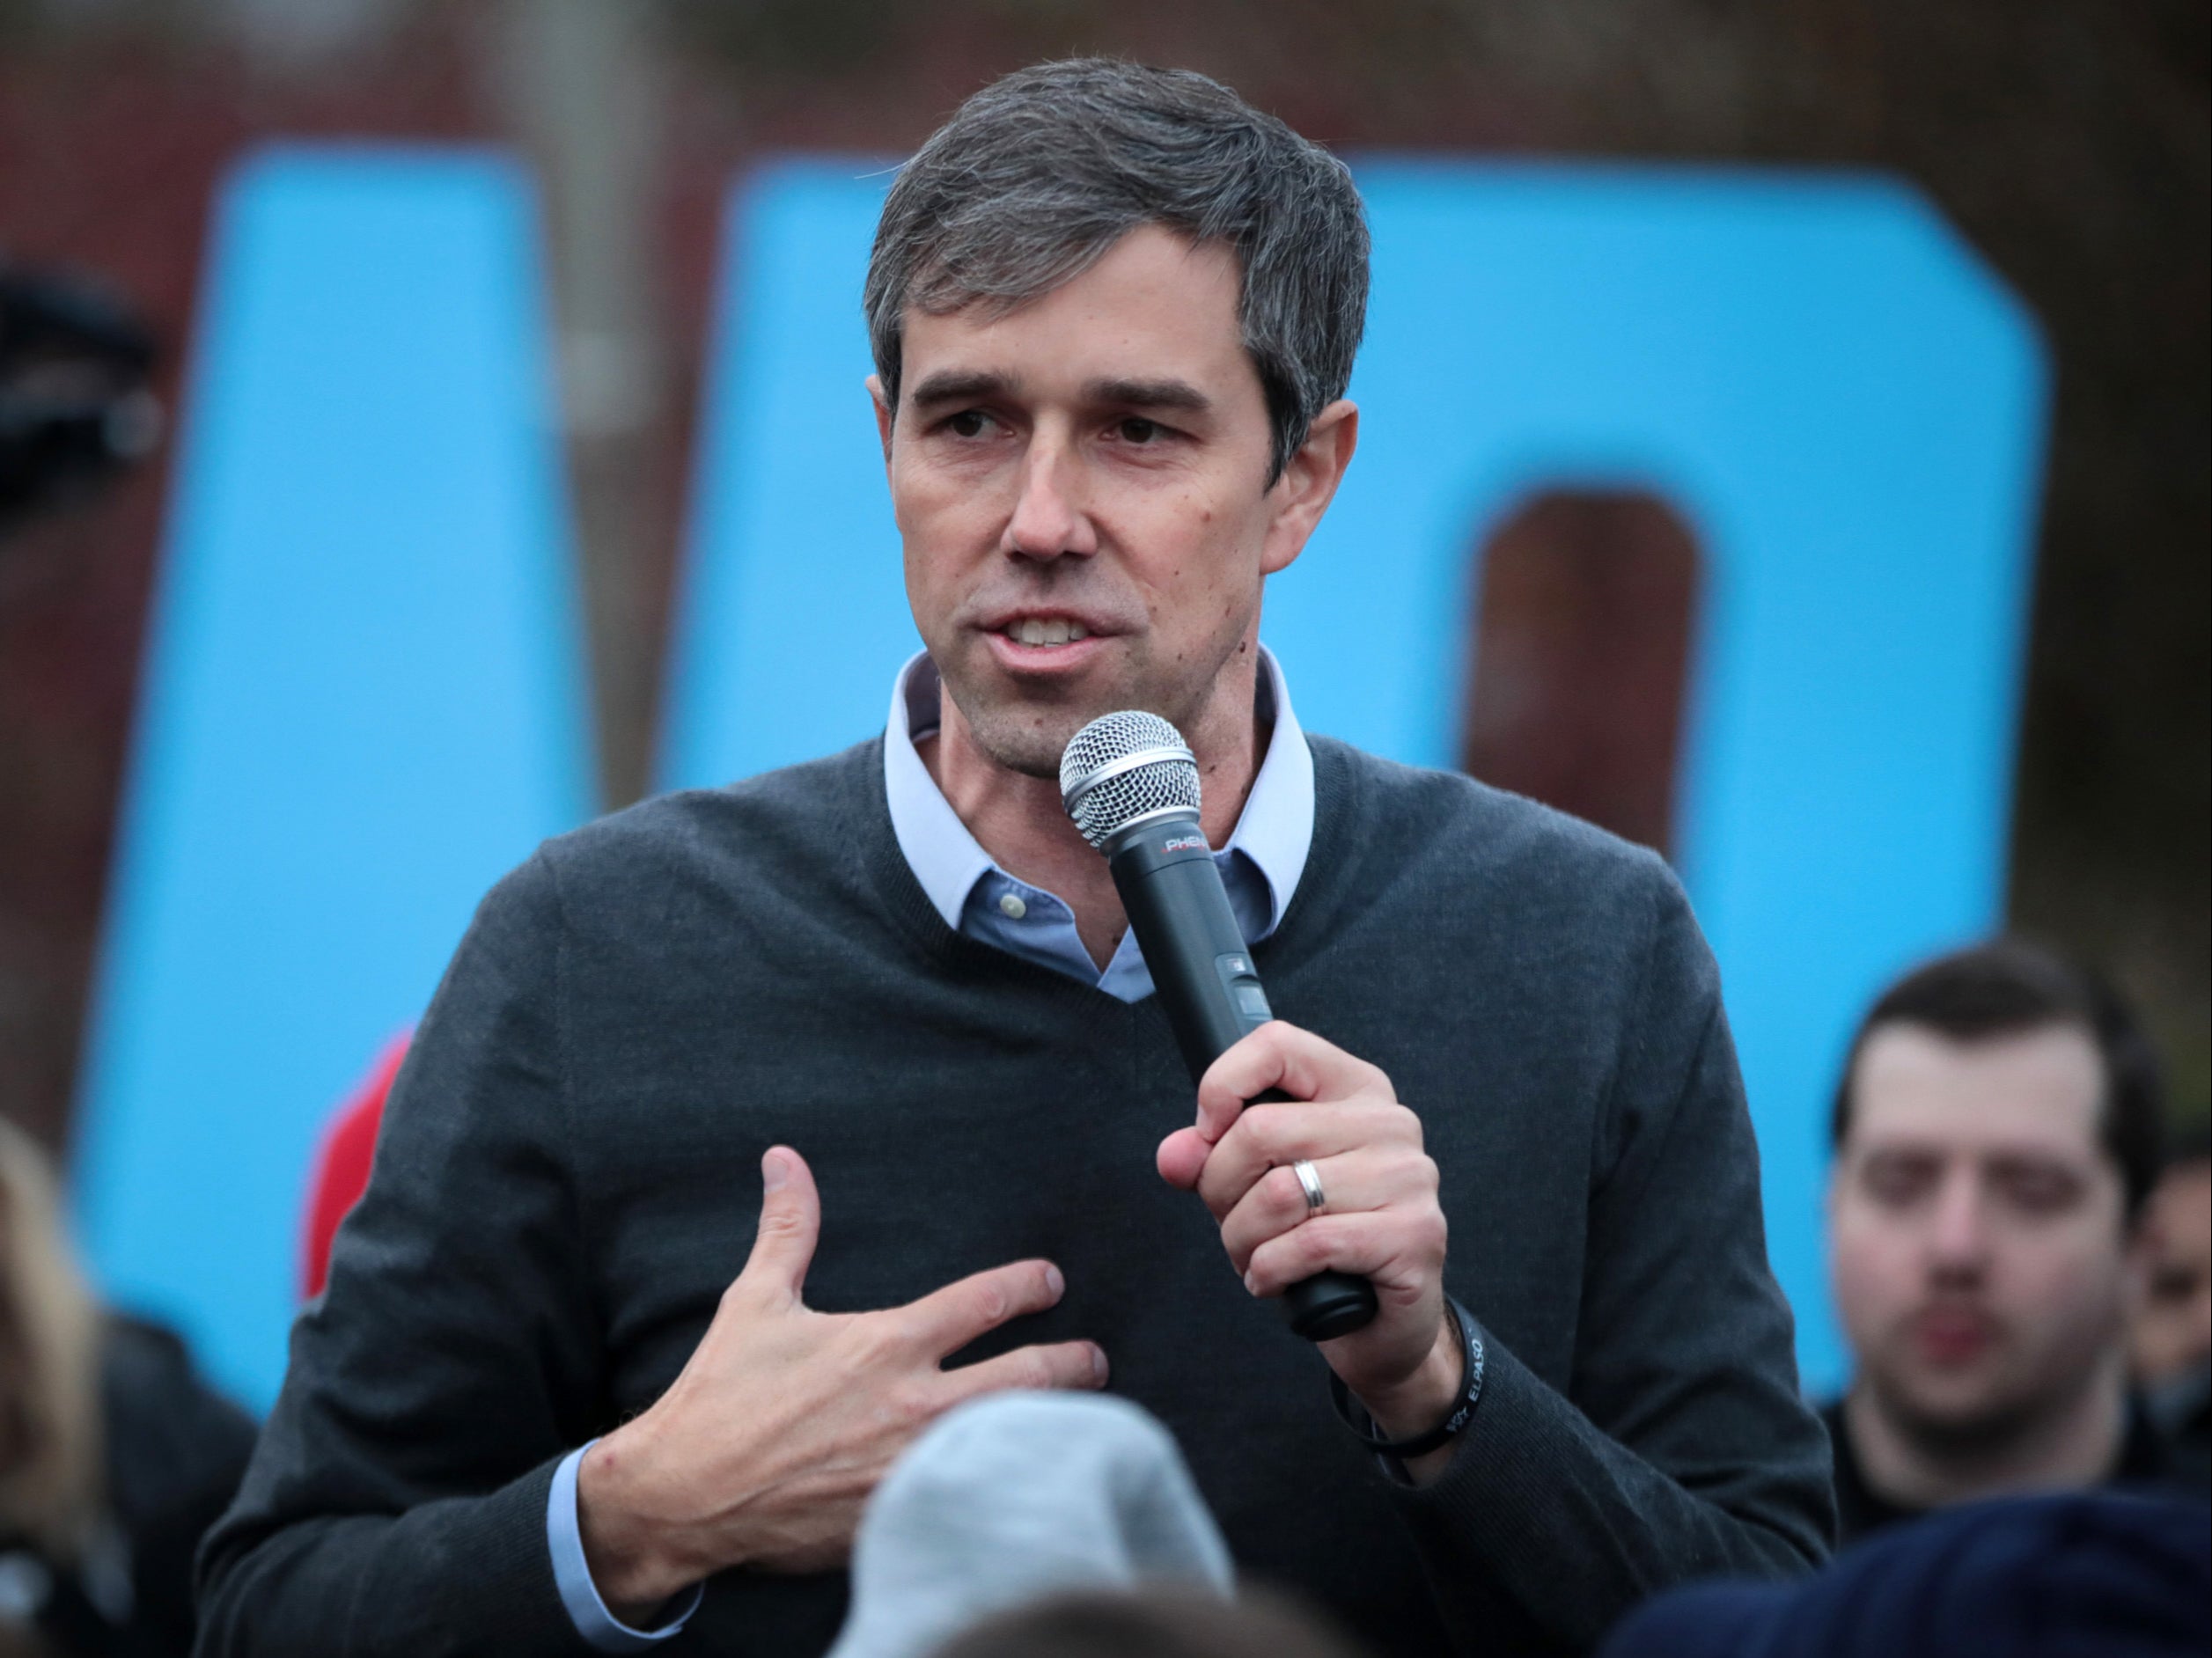 Former Rep. Beto O’Rourke (D-TX) addresses his supporters after announcing he was dropping out of the presidential race before the start of the Liberty and Justice Celebration being held at the Wells Fargo Arena on 01 November 2019 in Des Moines, Iowa